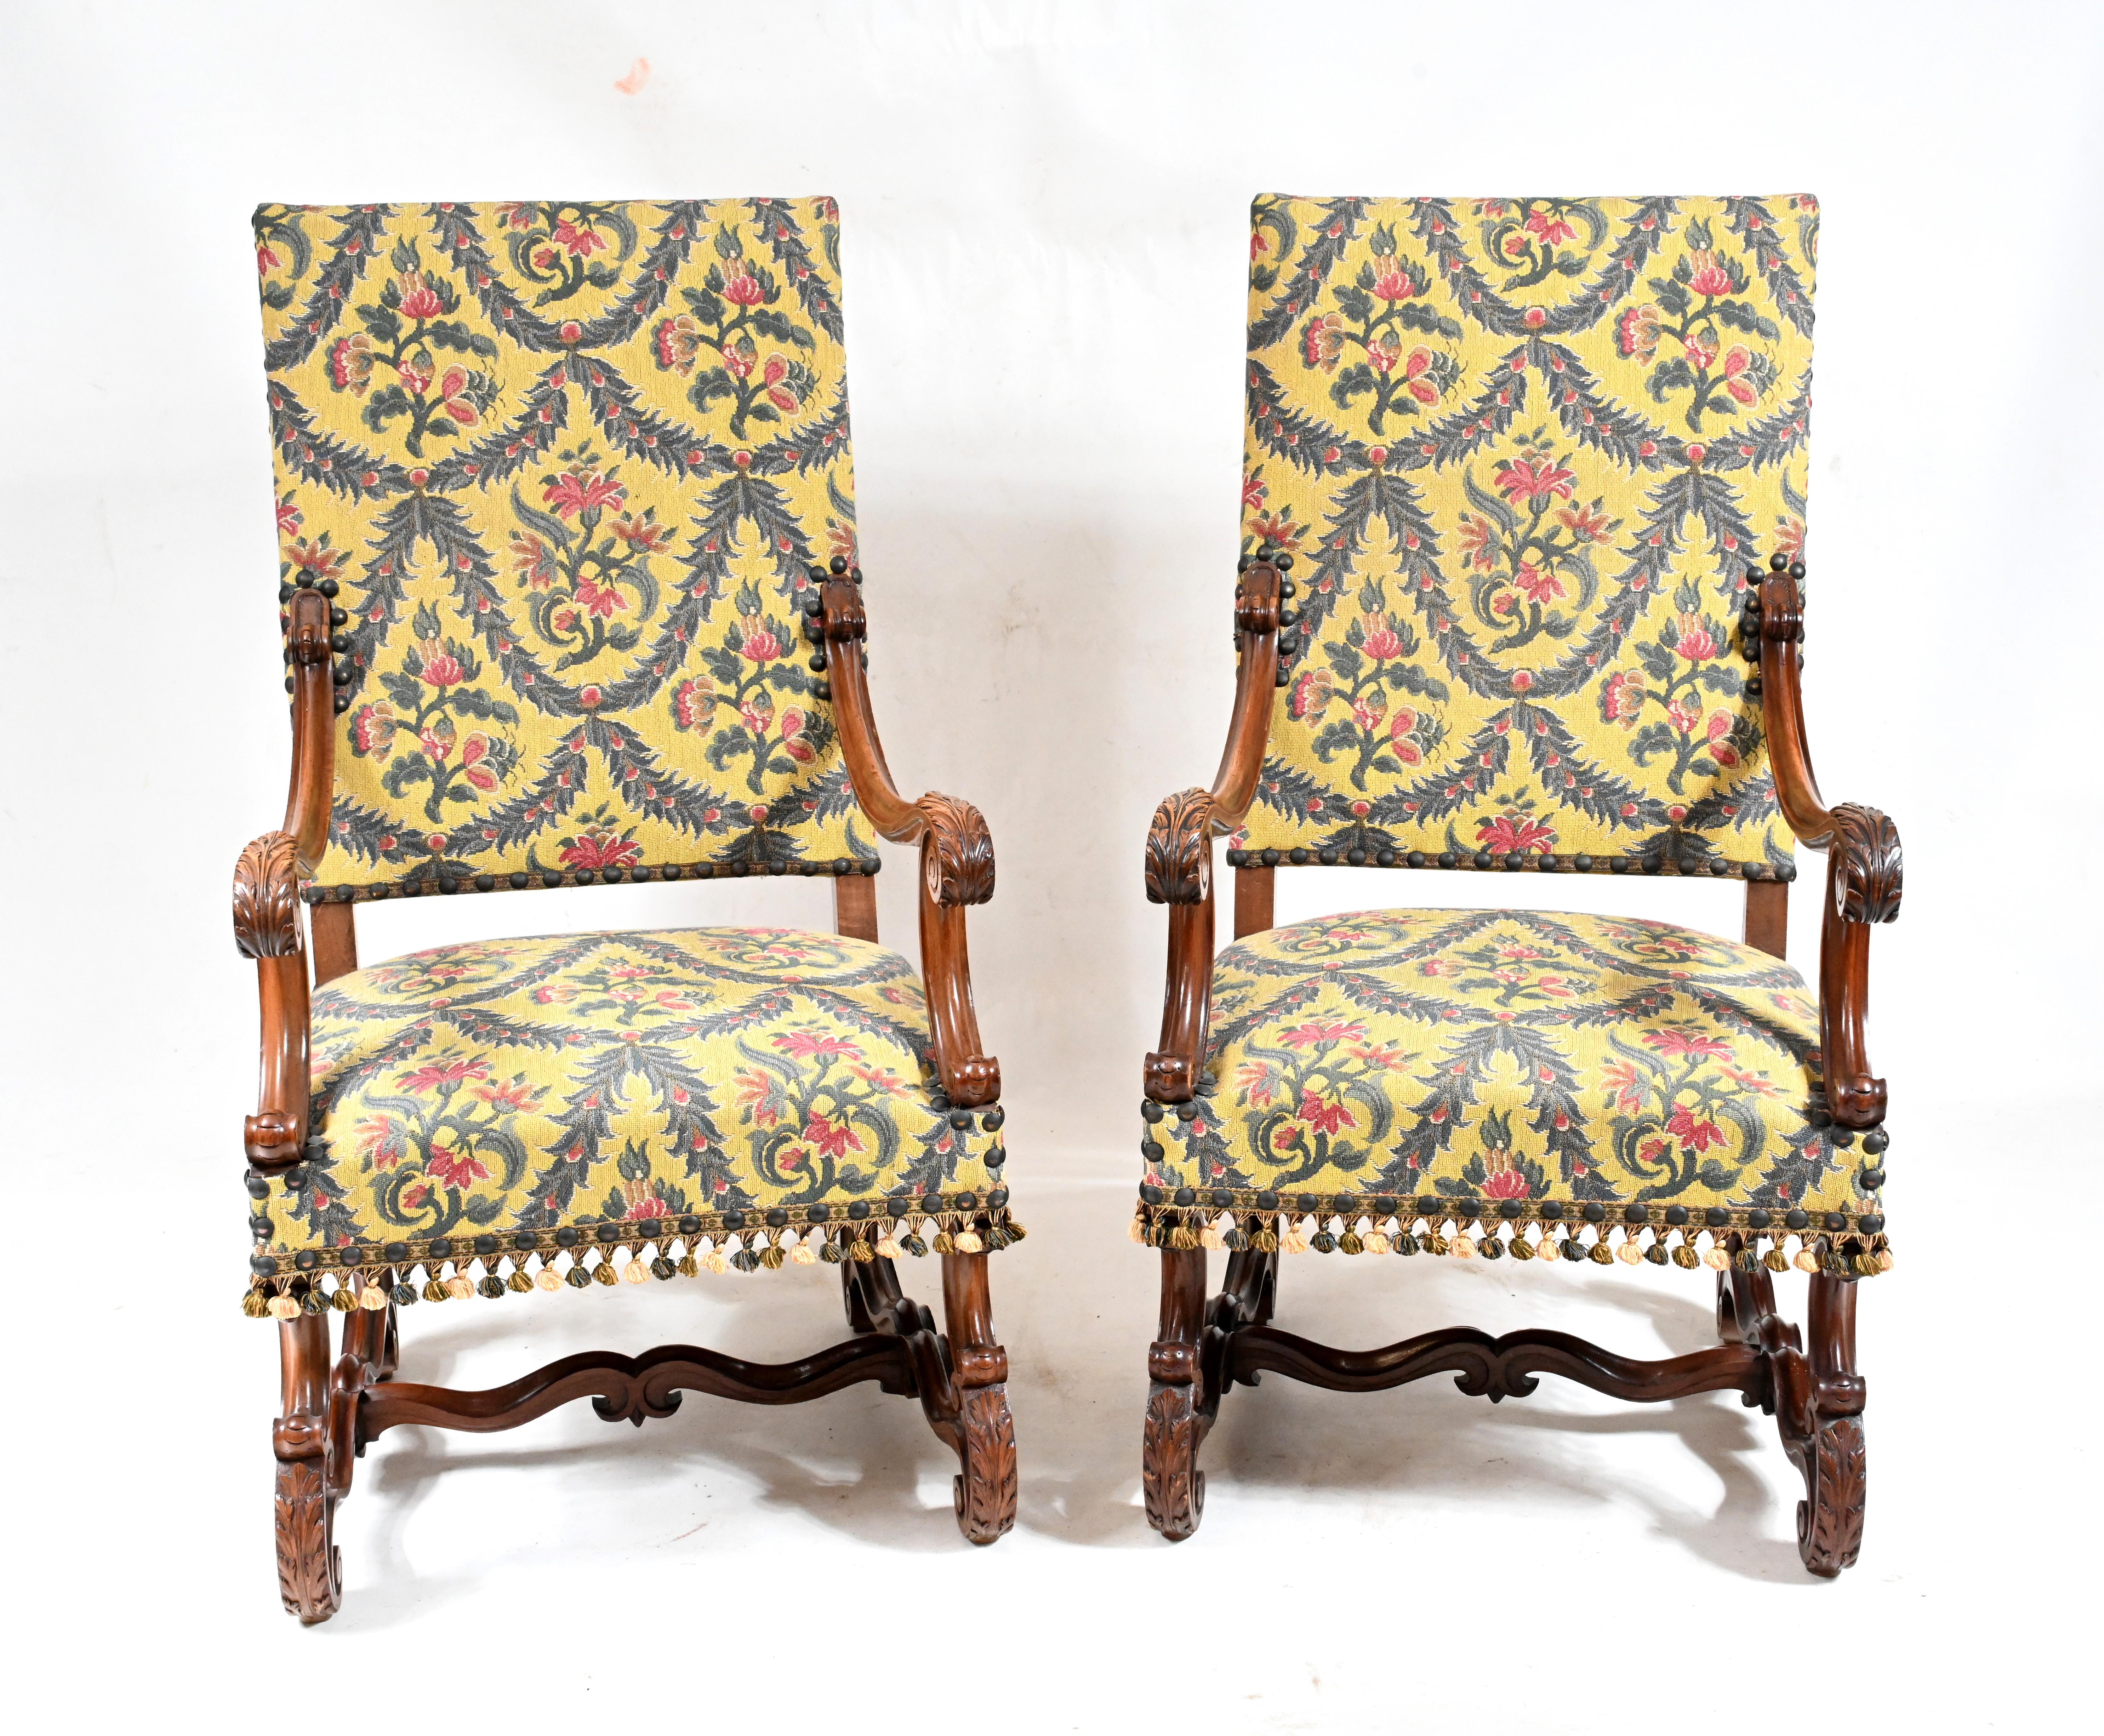 Gorgeous pair of antique walnut arm chairs in the Cromwellian manner.
Classic farmhouse look with carved details.
Upholstery is also great with woven tapestry.
Great pair of accent chairs.
We can ship to anywhere in the world.
Offered in great